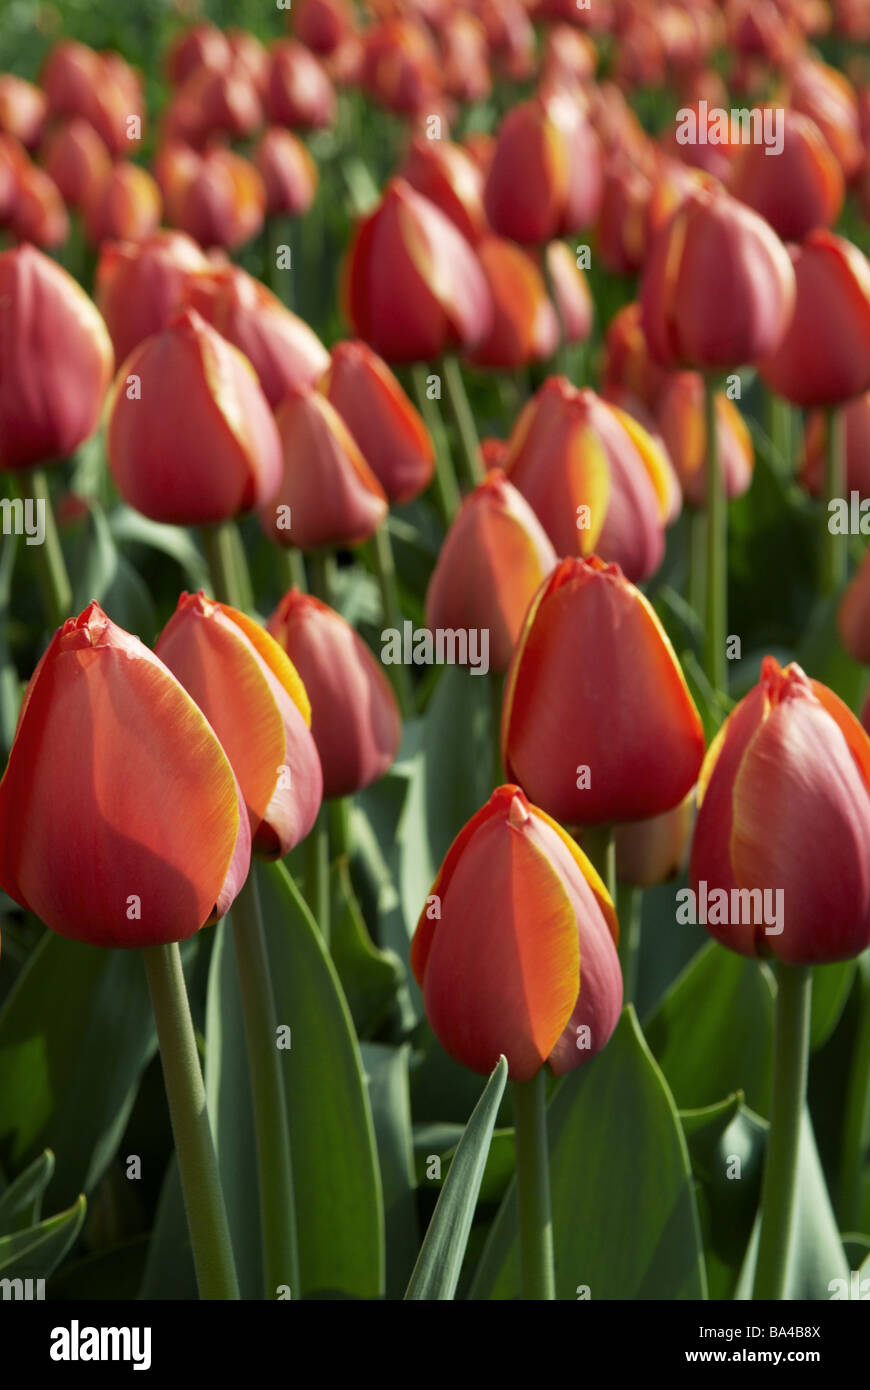 Tulip-field detail tulips blooms leaves red green salmon-colored 04/2006 build an extension bloomed outside leaf flower flowers Stock Photo